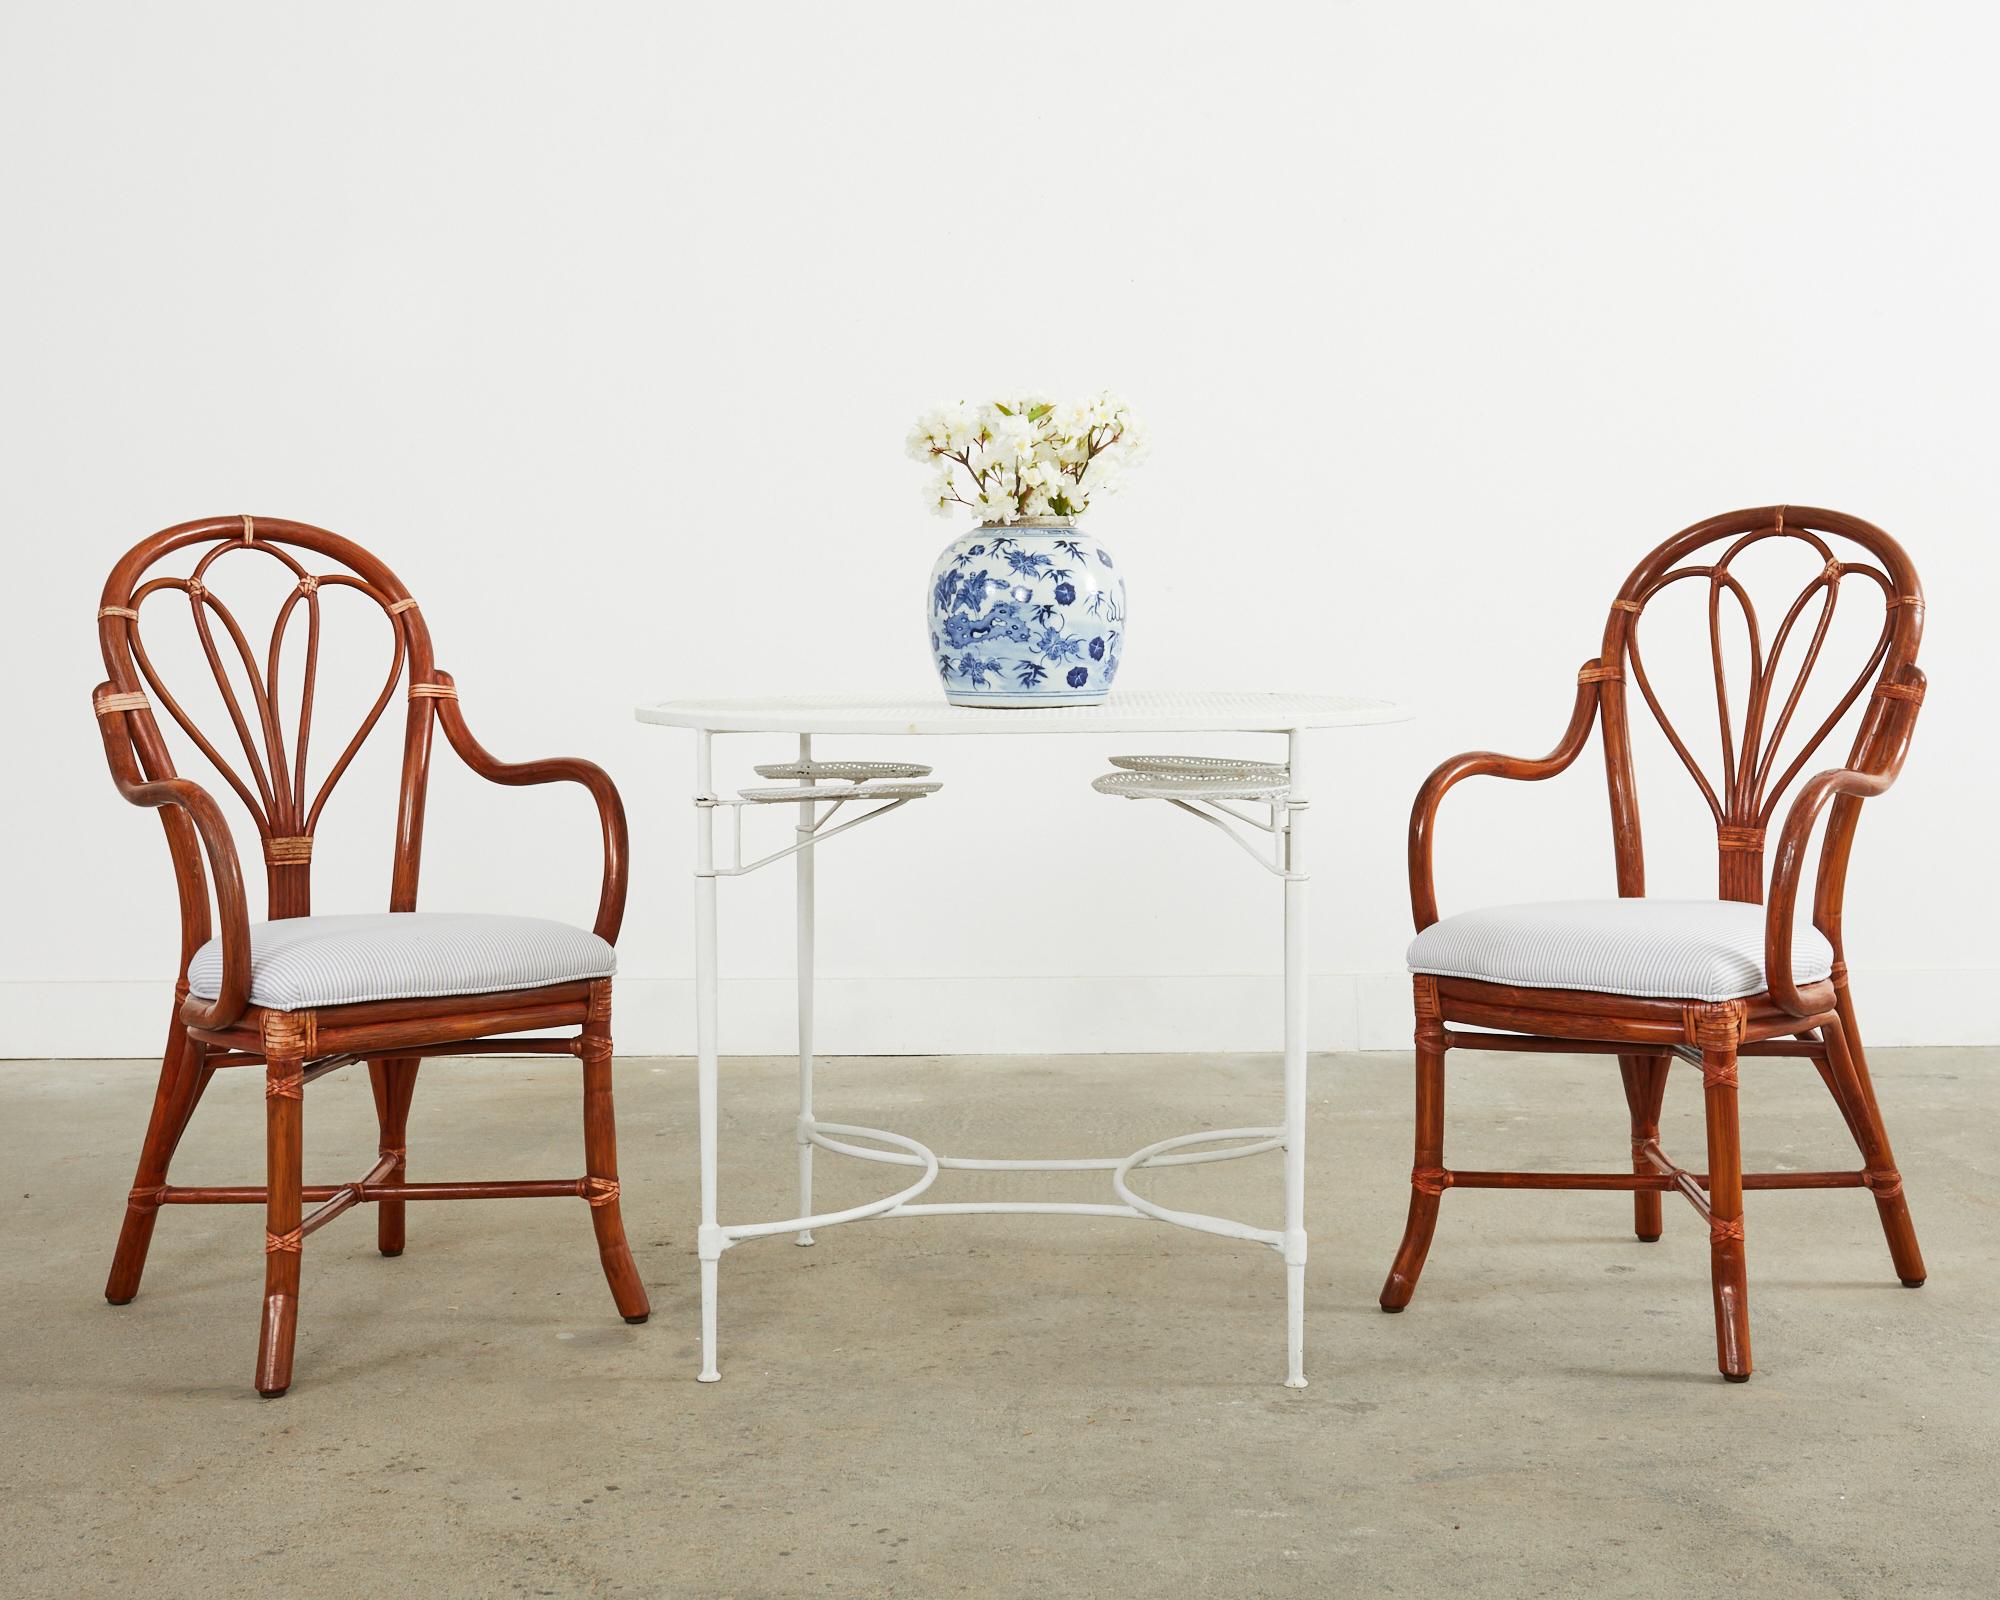 Exceptional set of six rattan dining armchairs made in the California coastal organic modern style by McGuire. The chairs feature a bentwood rattan frame with gracefully curved arms conjoined to an oval back with a fan shaped splat. The joints are